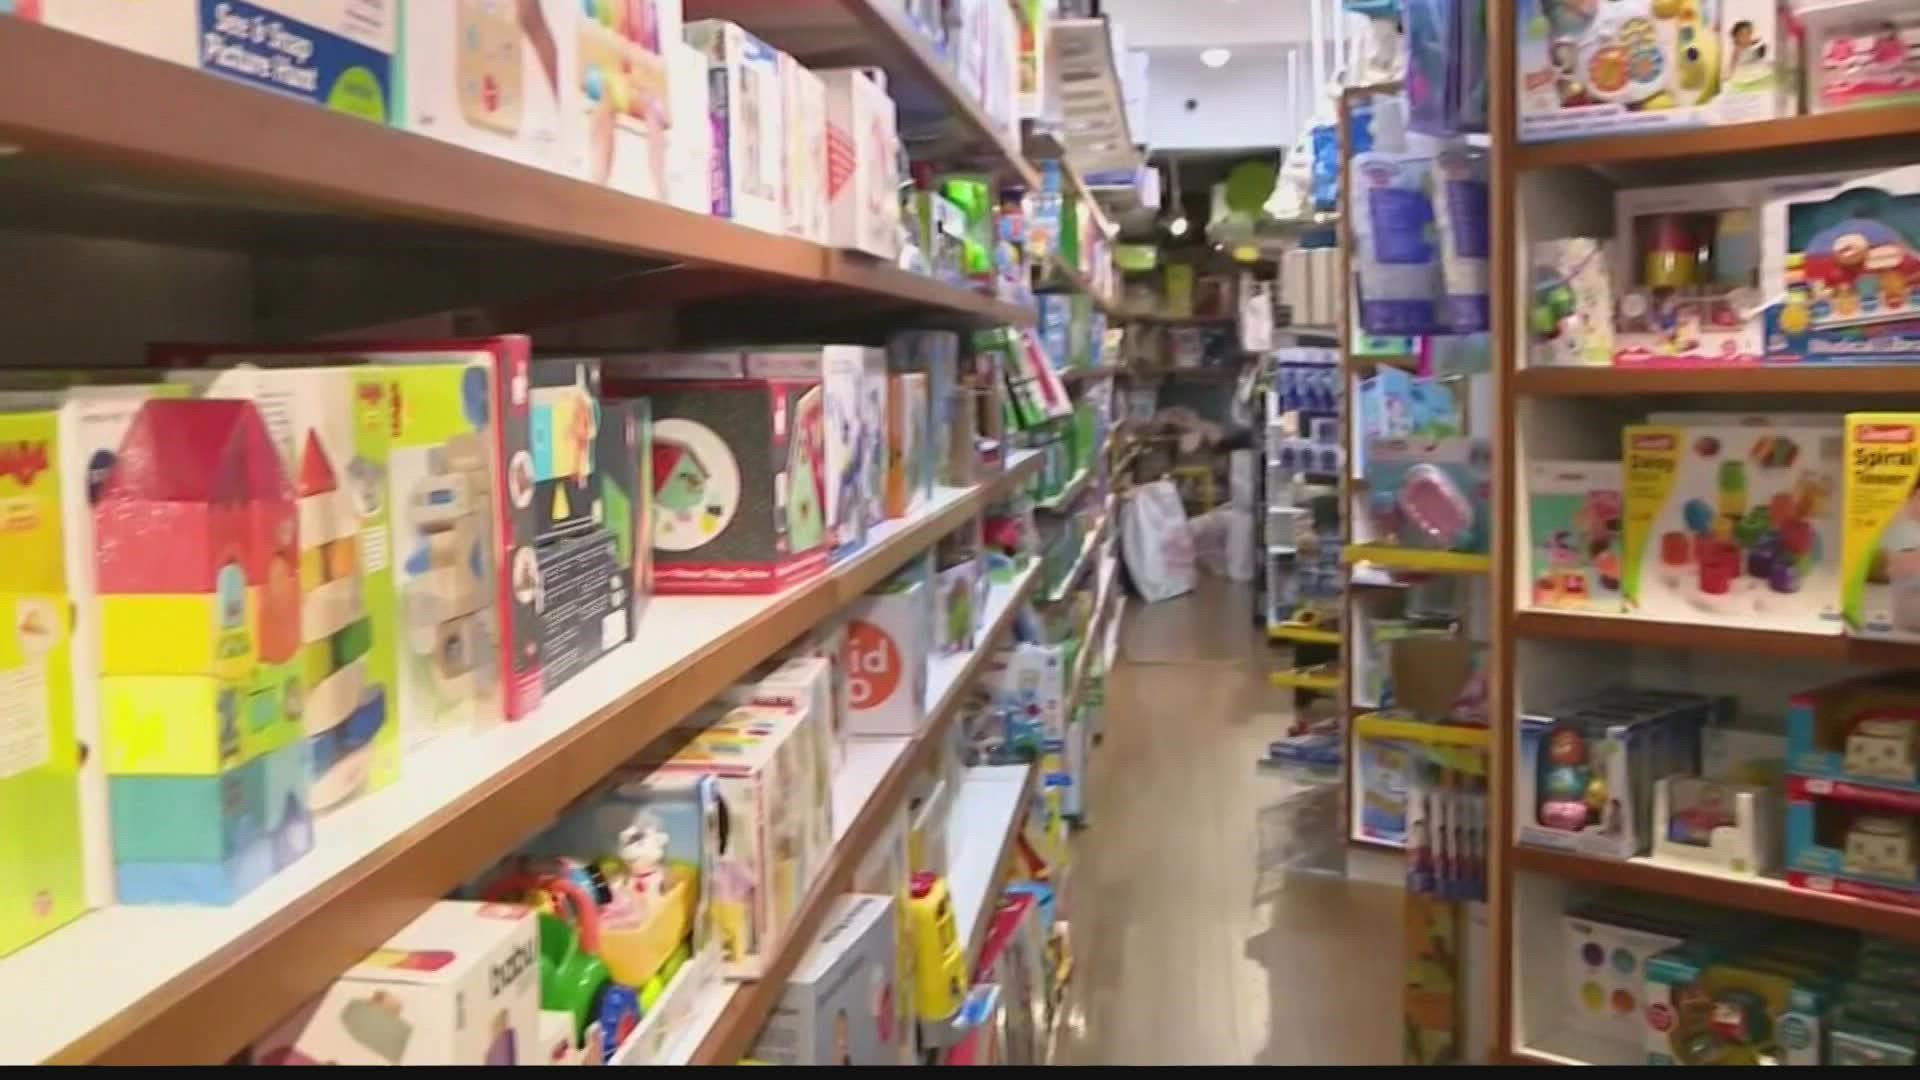 Local nonprofit AshaKiran hosts holiday supply drive for victims of domestic violence